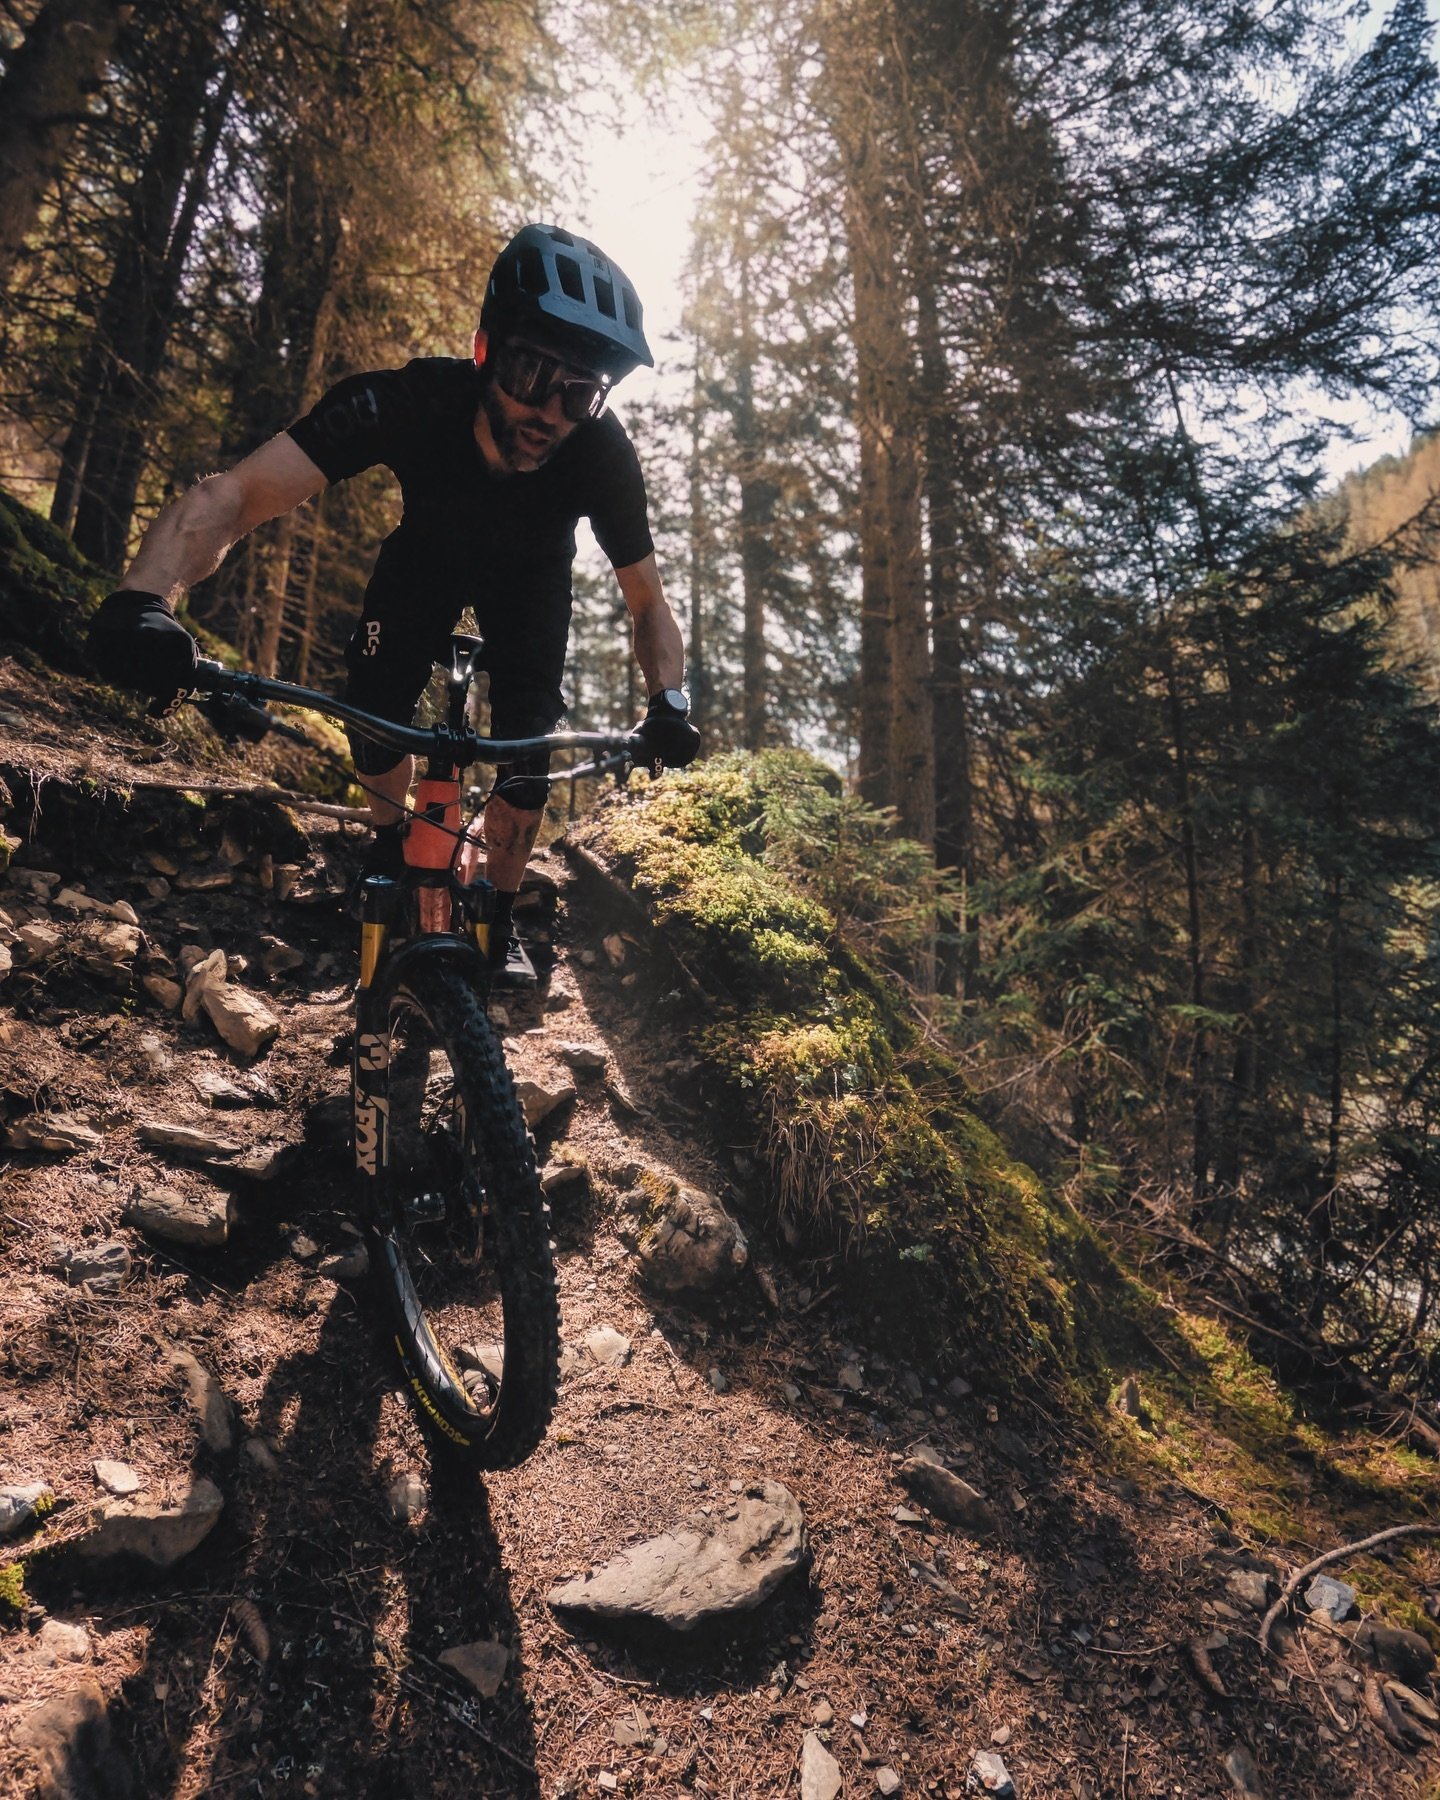 Had to turn around due to a landslide yesterday (one of many other obstacles that day) and made the best of it. 😅
&bull;&bull;&bull;
@evilbicycles #WreckoningV3
@pocsports 🪖🕶👕🩳🧤
@bikehub.ch 🔧⚙️
@weareonecomposites
&bull;&bull;&bull;
#liveoutdo